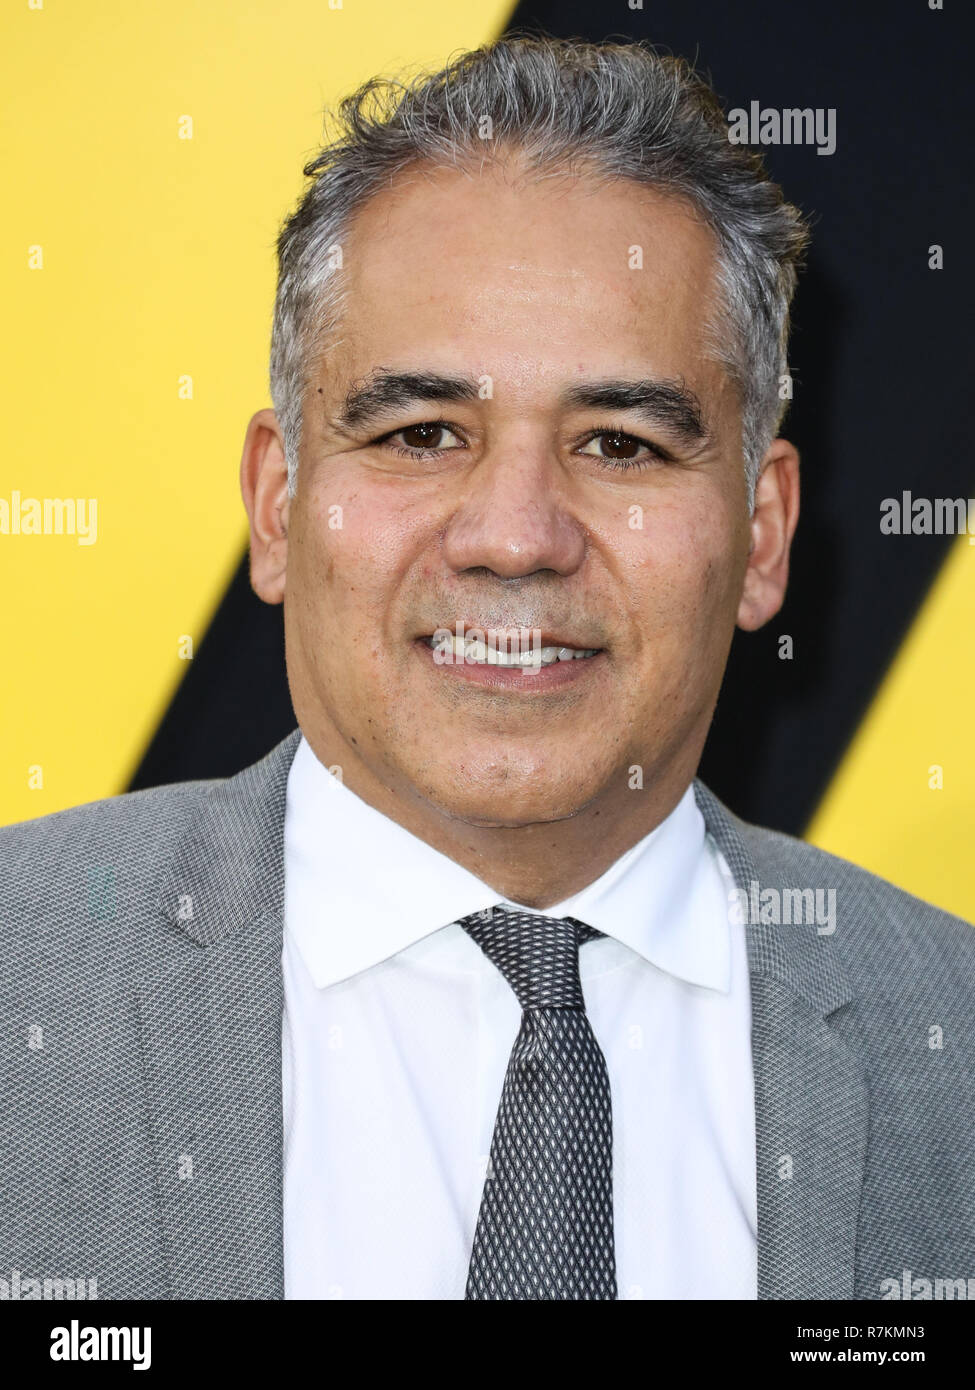 Los Angeles, USA. 9th Dec 2018. Actor John Ortiz arrives at the Los Angeles Premiere Of Paramount Pictures' 'Bumblebee' held at the TCL Chinese Theatre IMAX on December 9, 2018 in Hollywood, Los Angeles, California, United States. (Photo by Xavier Collin/Image Press Agency) Credit: Image Press Agency/Alamy Live News Stock Photo